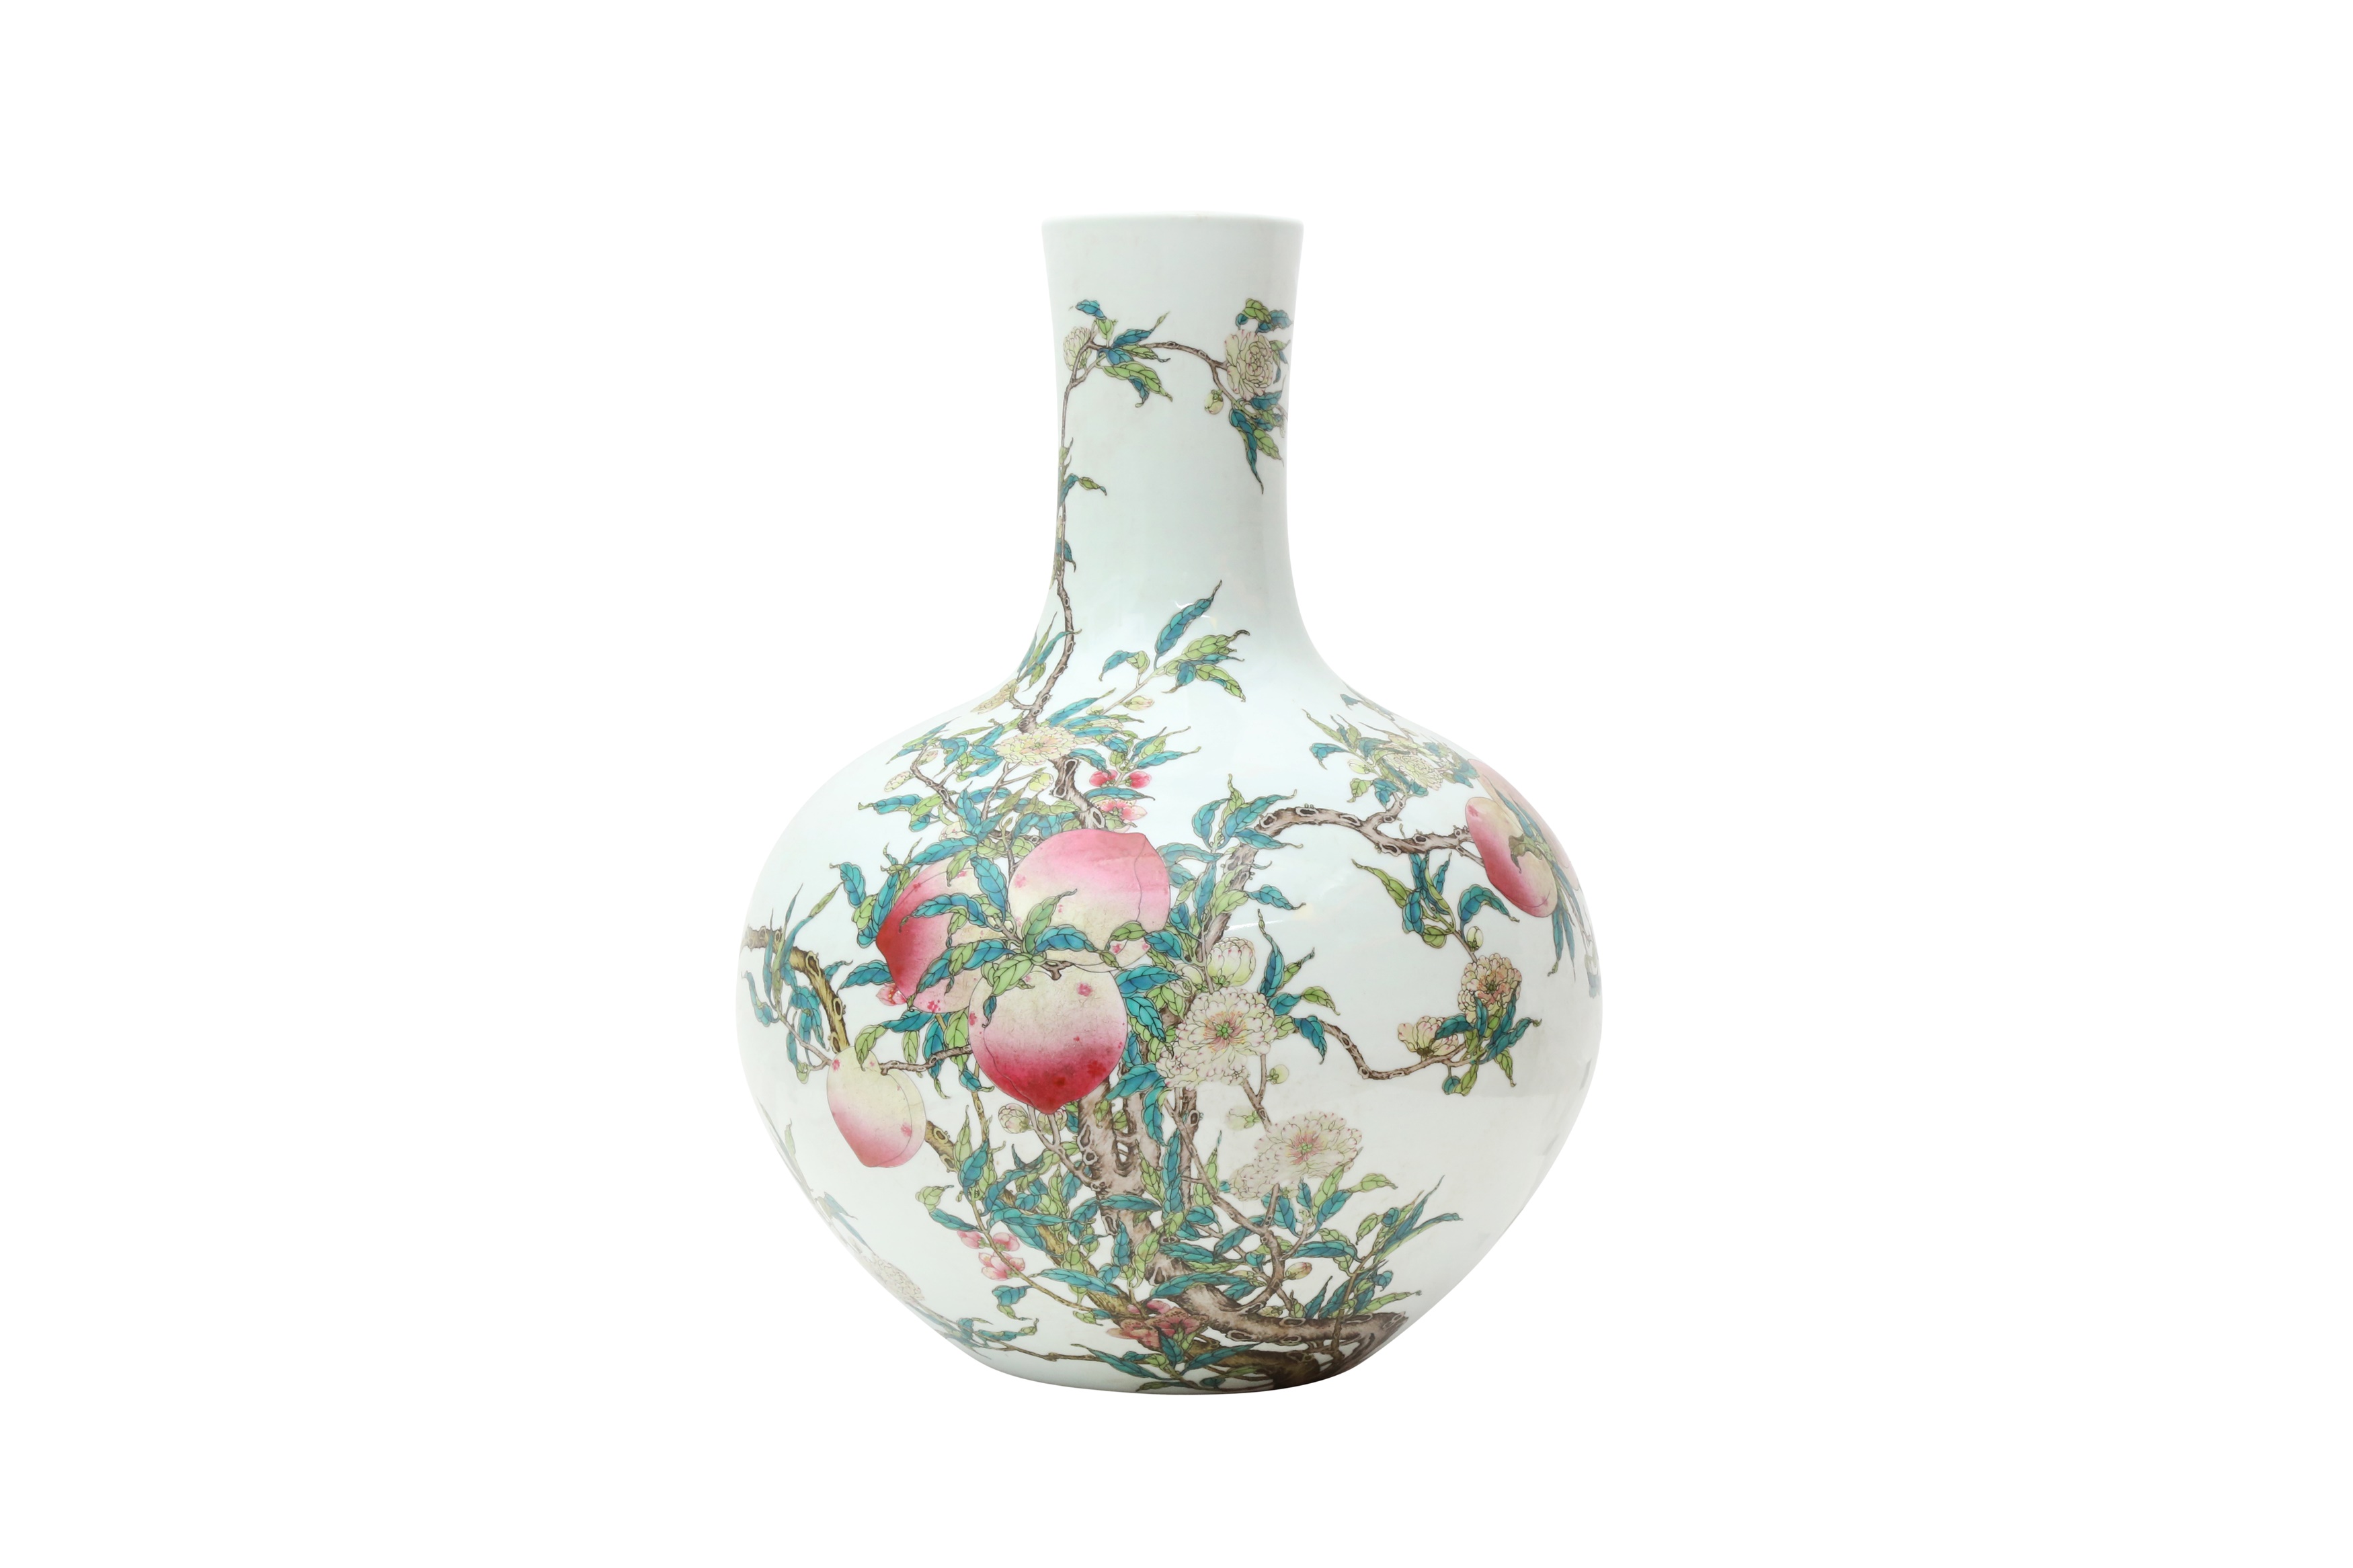 A LARGE CHINESE FAMILLE-ROSE 'PEACHES' VASE, TIANQIUPING 十九或二十世紀 粉彩蟠桃紋天球瓶